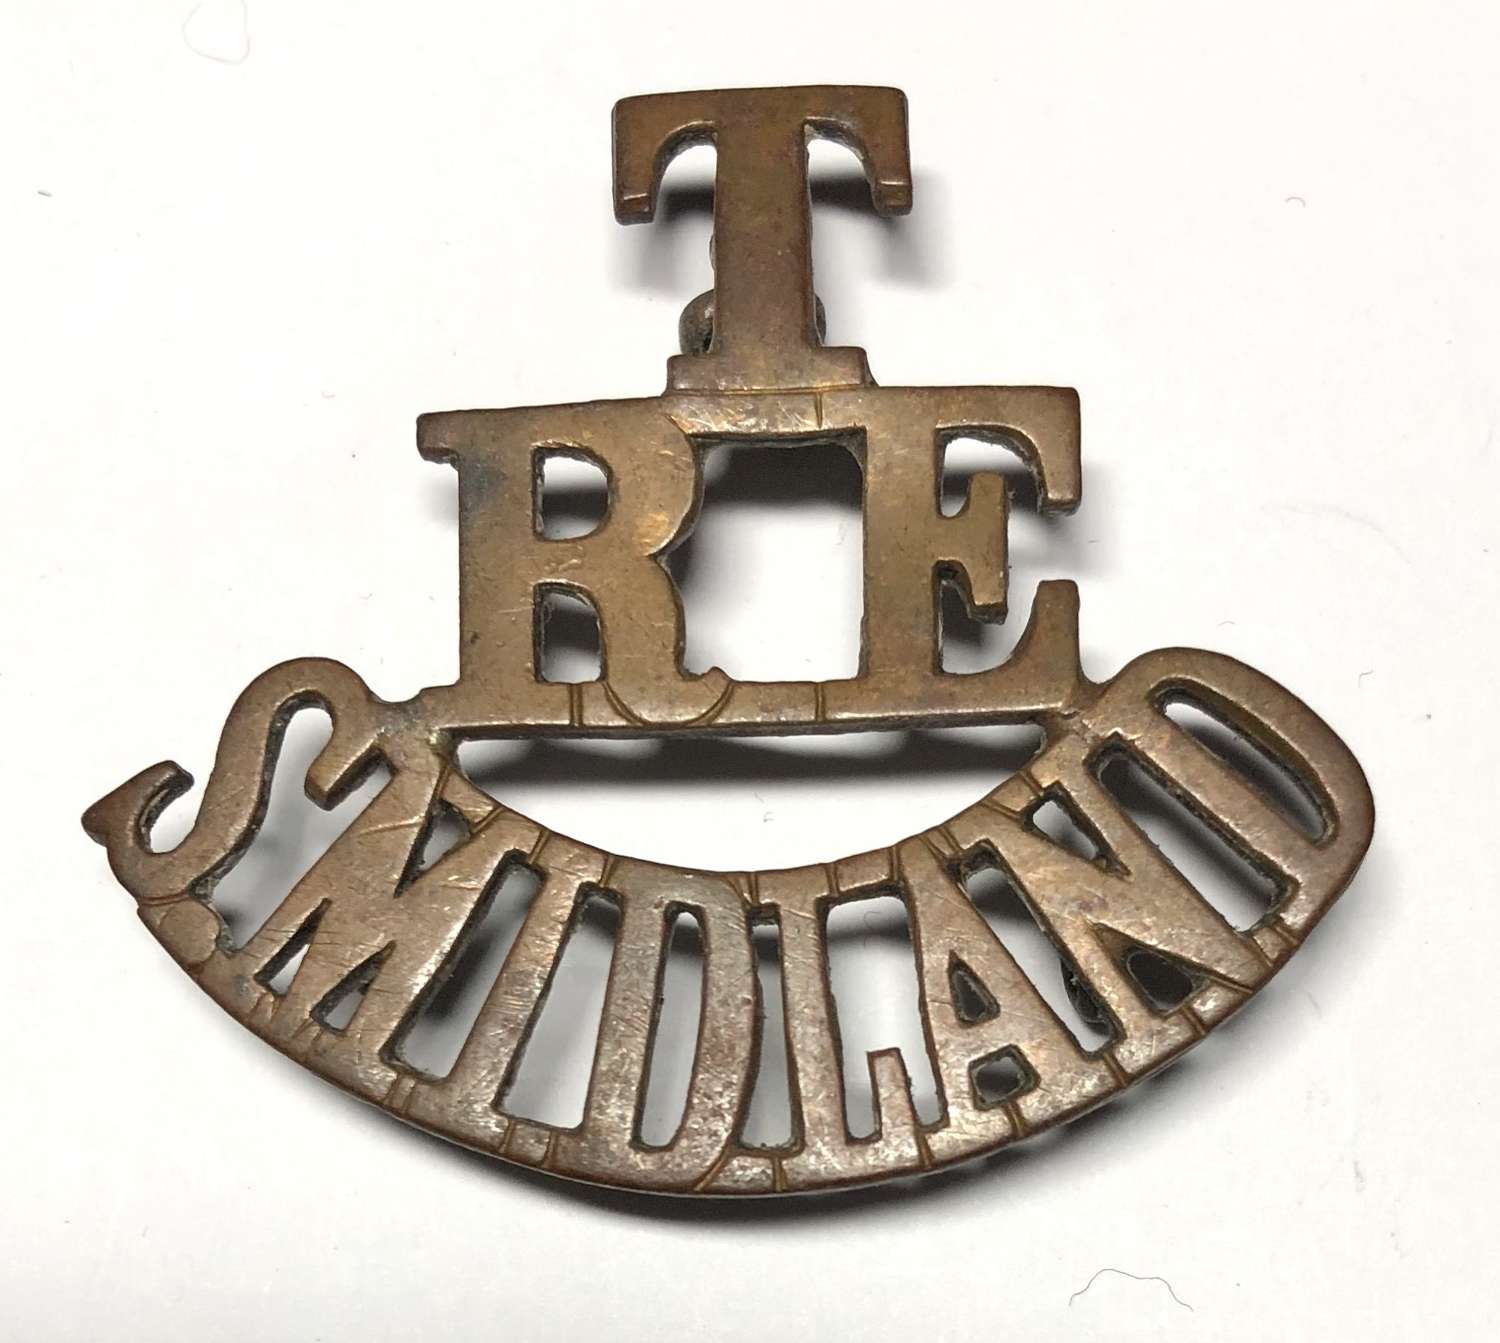 T / RE / S.MIDLAND  divisional engineers shoulder title c1908-21